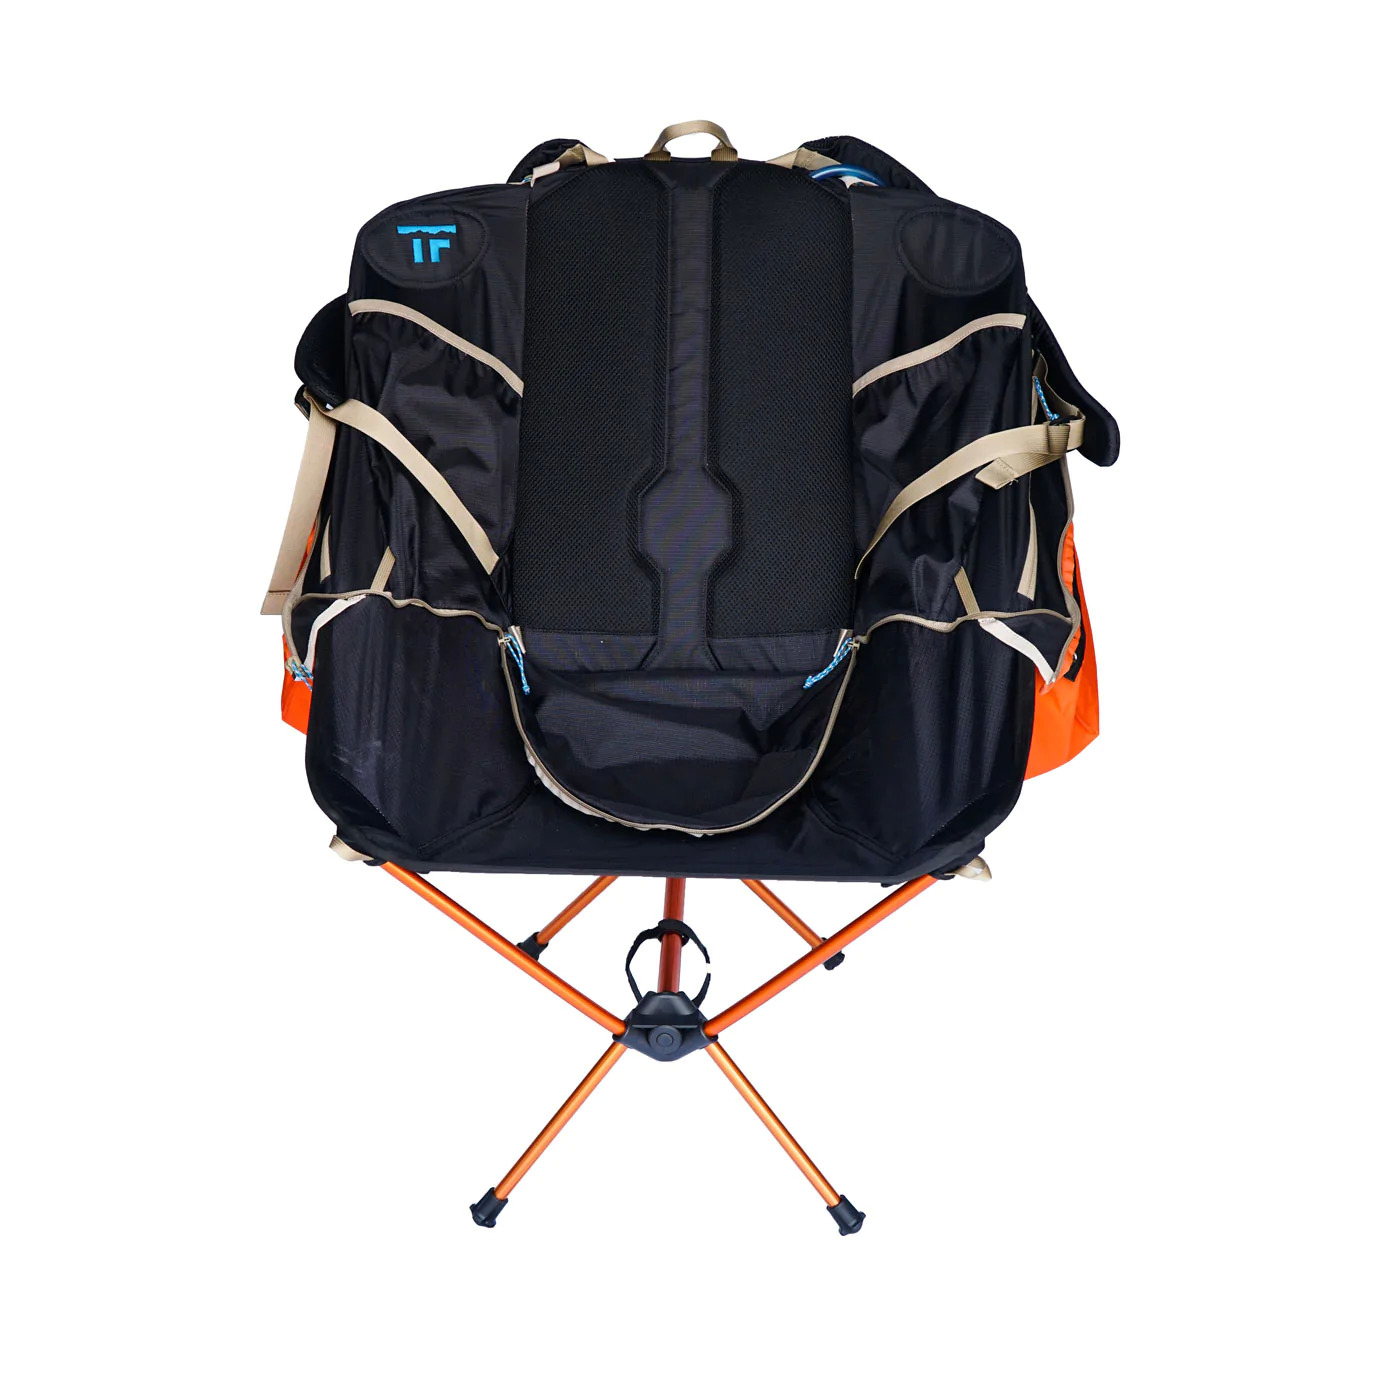 Trailform - Hiking 36L Backpack Cooler Chair $206